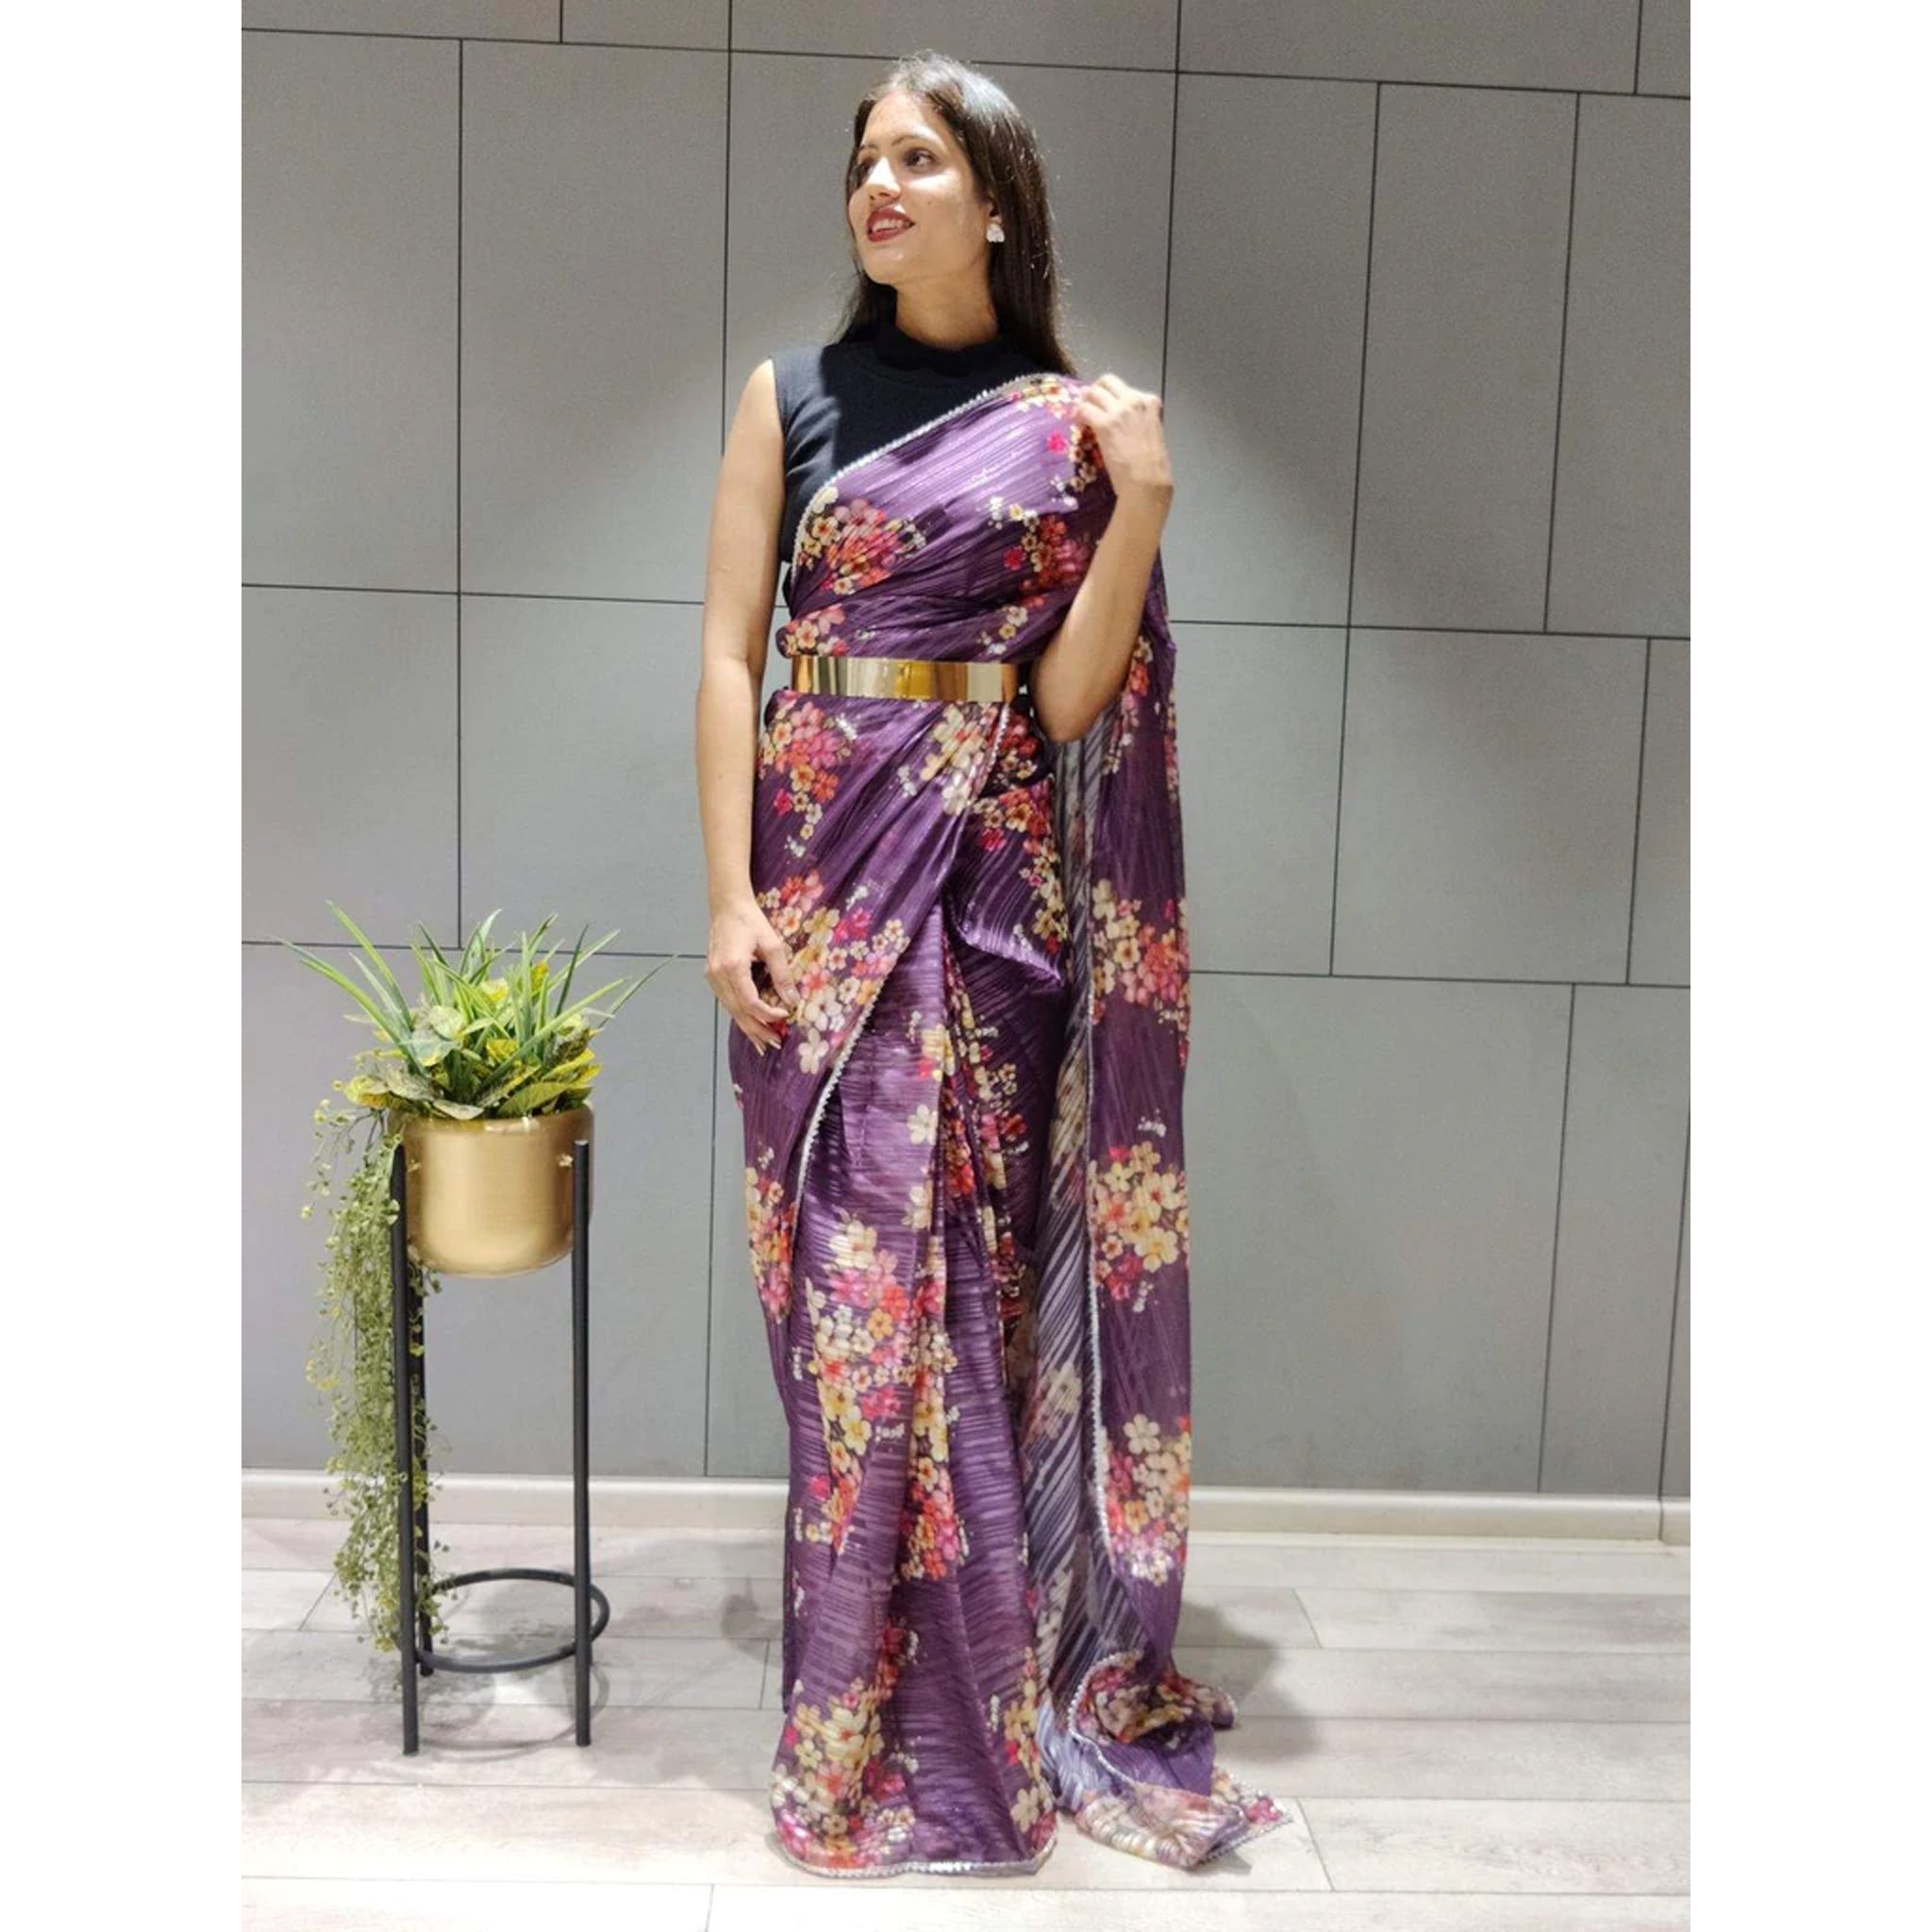 Flower Printed Ready to wear Chiffon Saree with Metal Belt - Colorful Saree